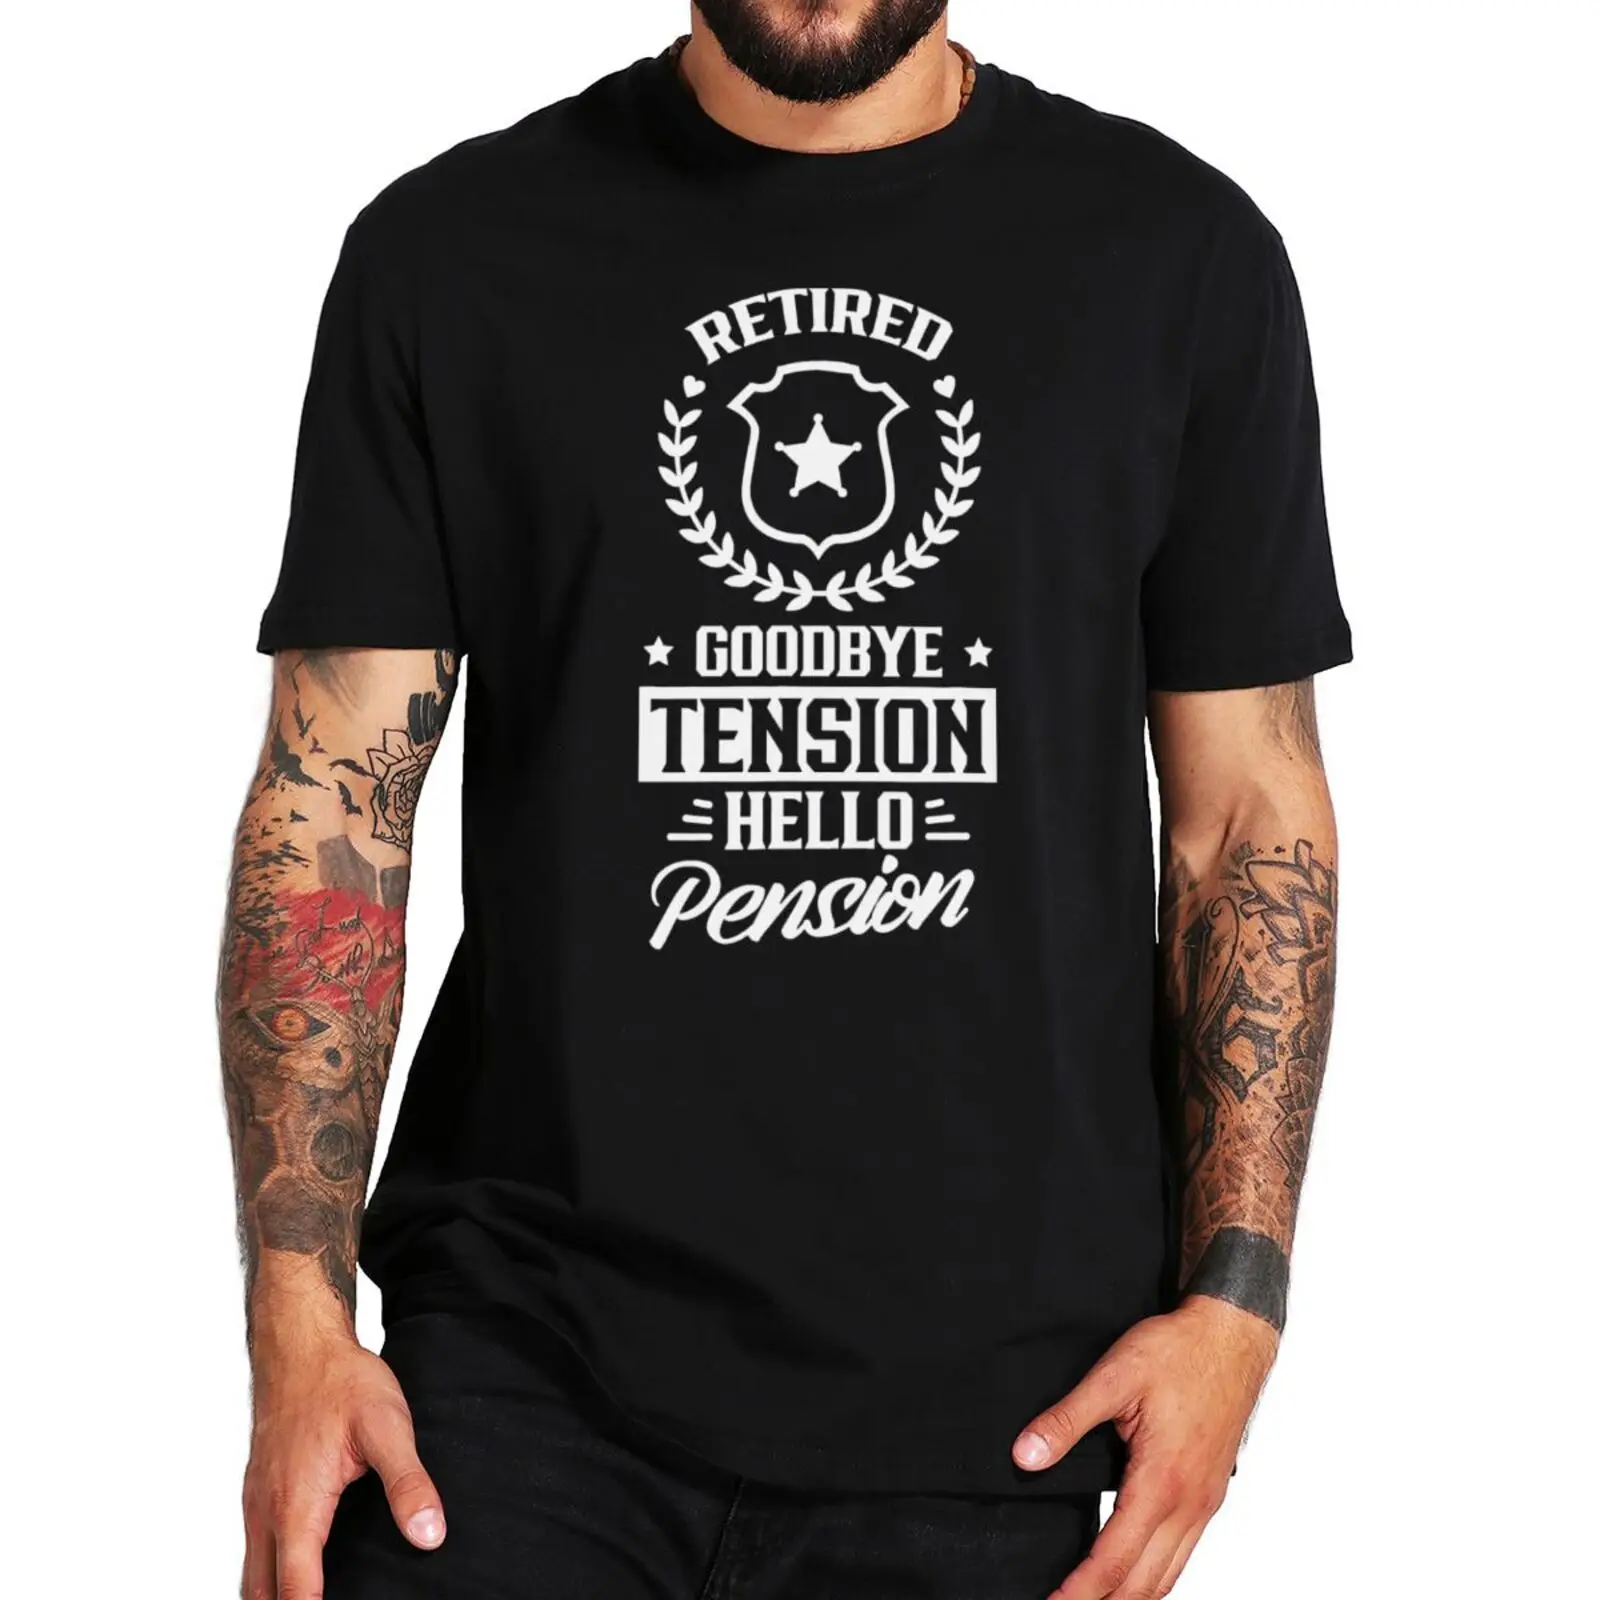 

Retirement Goodbye Tension Hello Pension T-Shirt Funny Retire Gift Graphic Tee Tops EU Size 100% Cotton Summer Unisex T Shirts